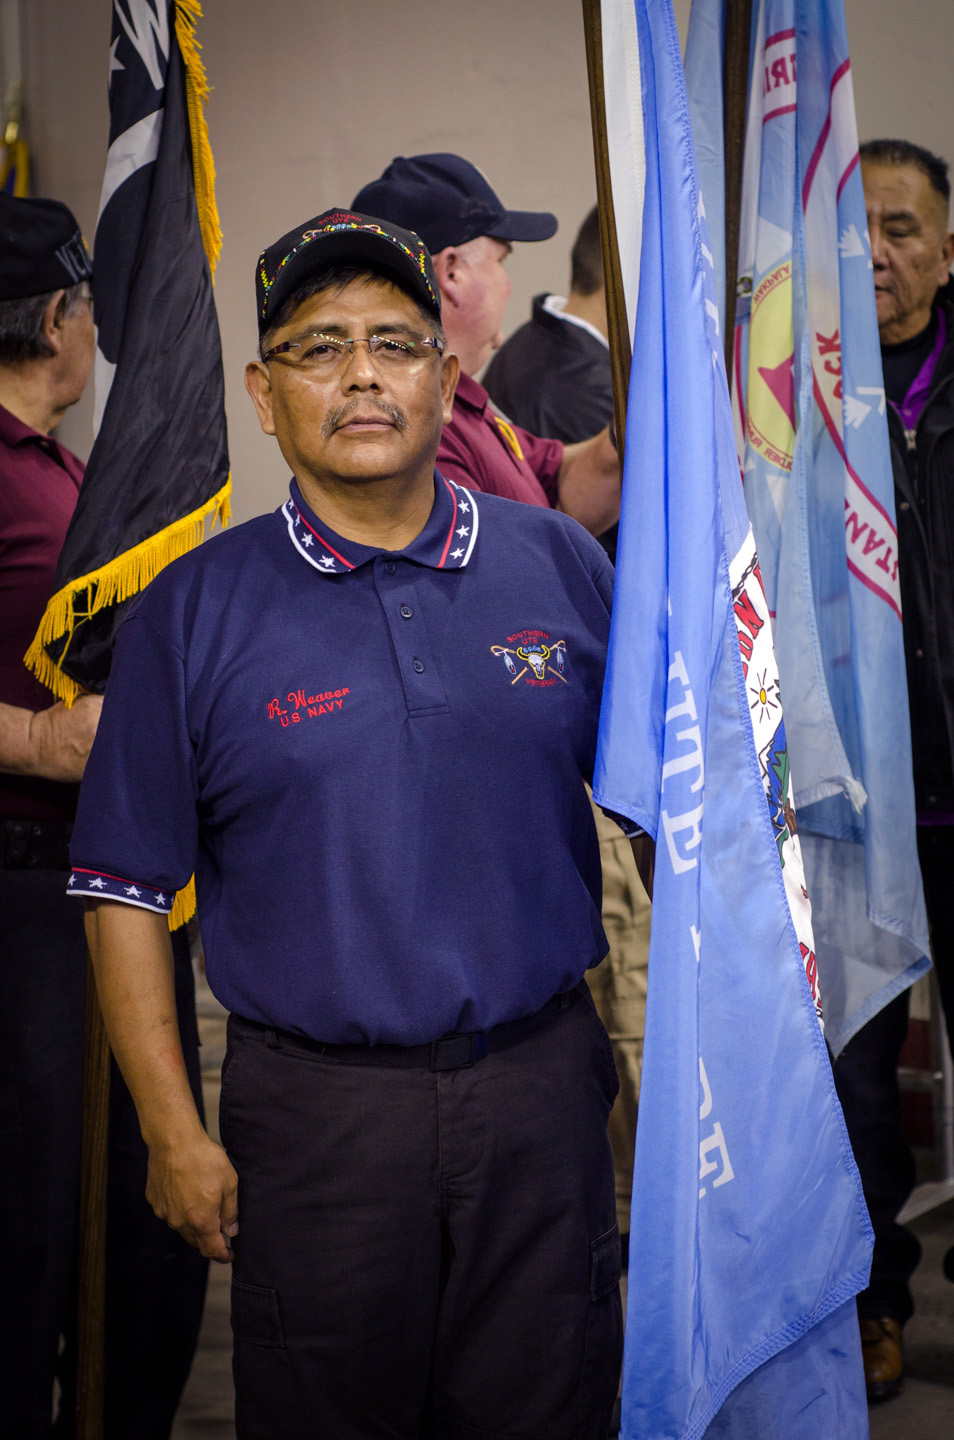 Representing the Southern Ute Tribe and Southern Ute Veterans Association, Rudley Weaver brought in the tribe’s flag each night